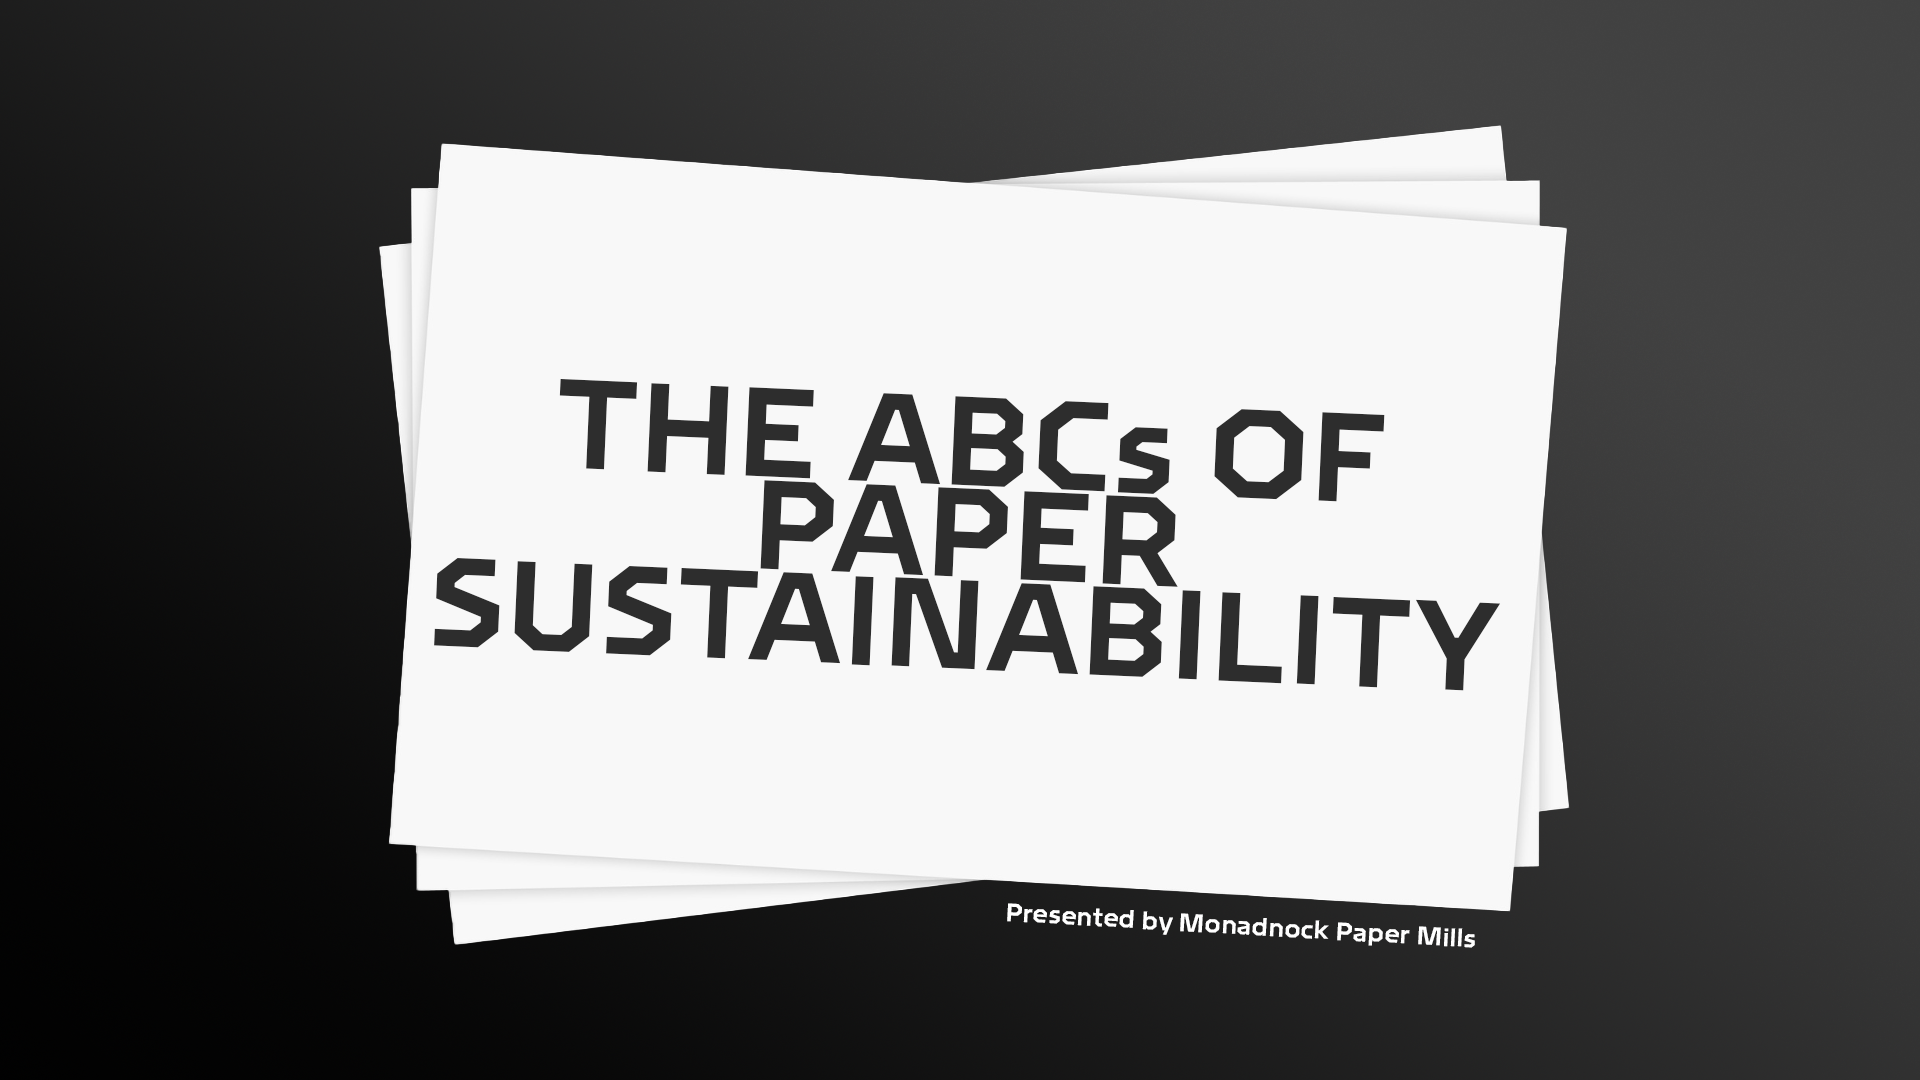 The ABCs of Paper Sustainability